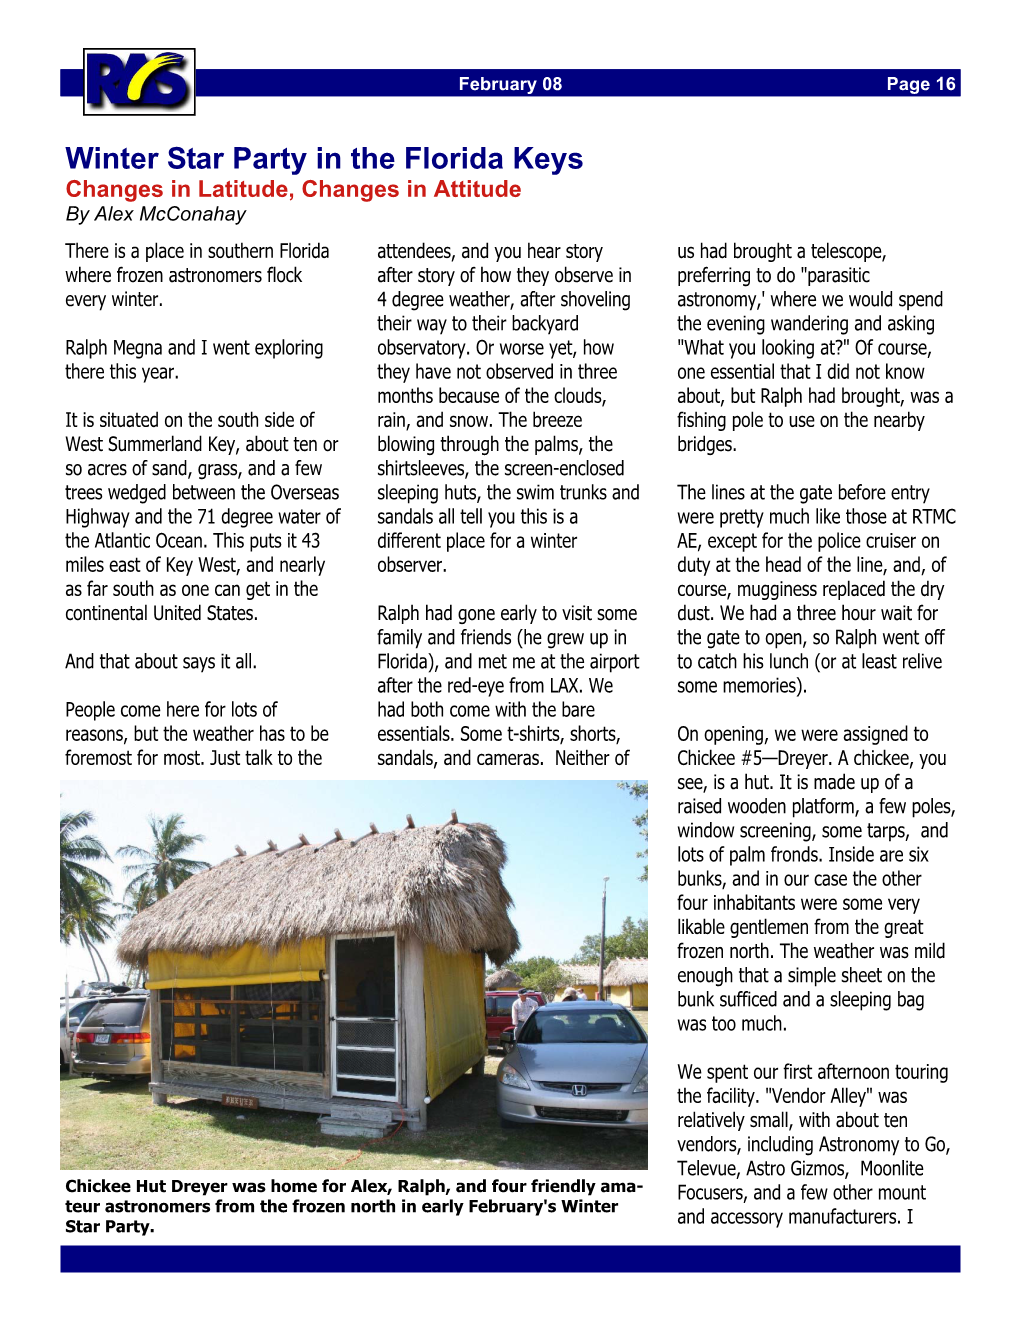 Winter Star Party in the Florida Keys Changes in Latitude, Changes in Attitude by Alex Mcconahay